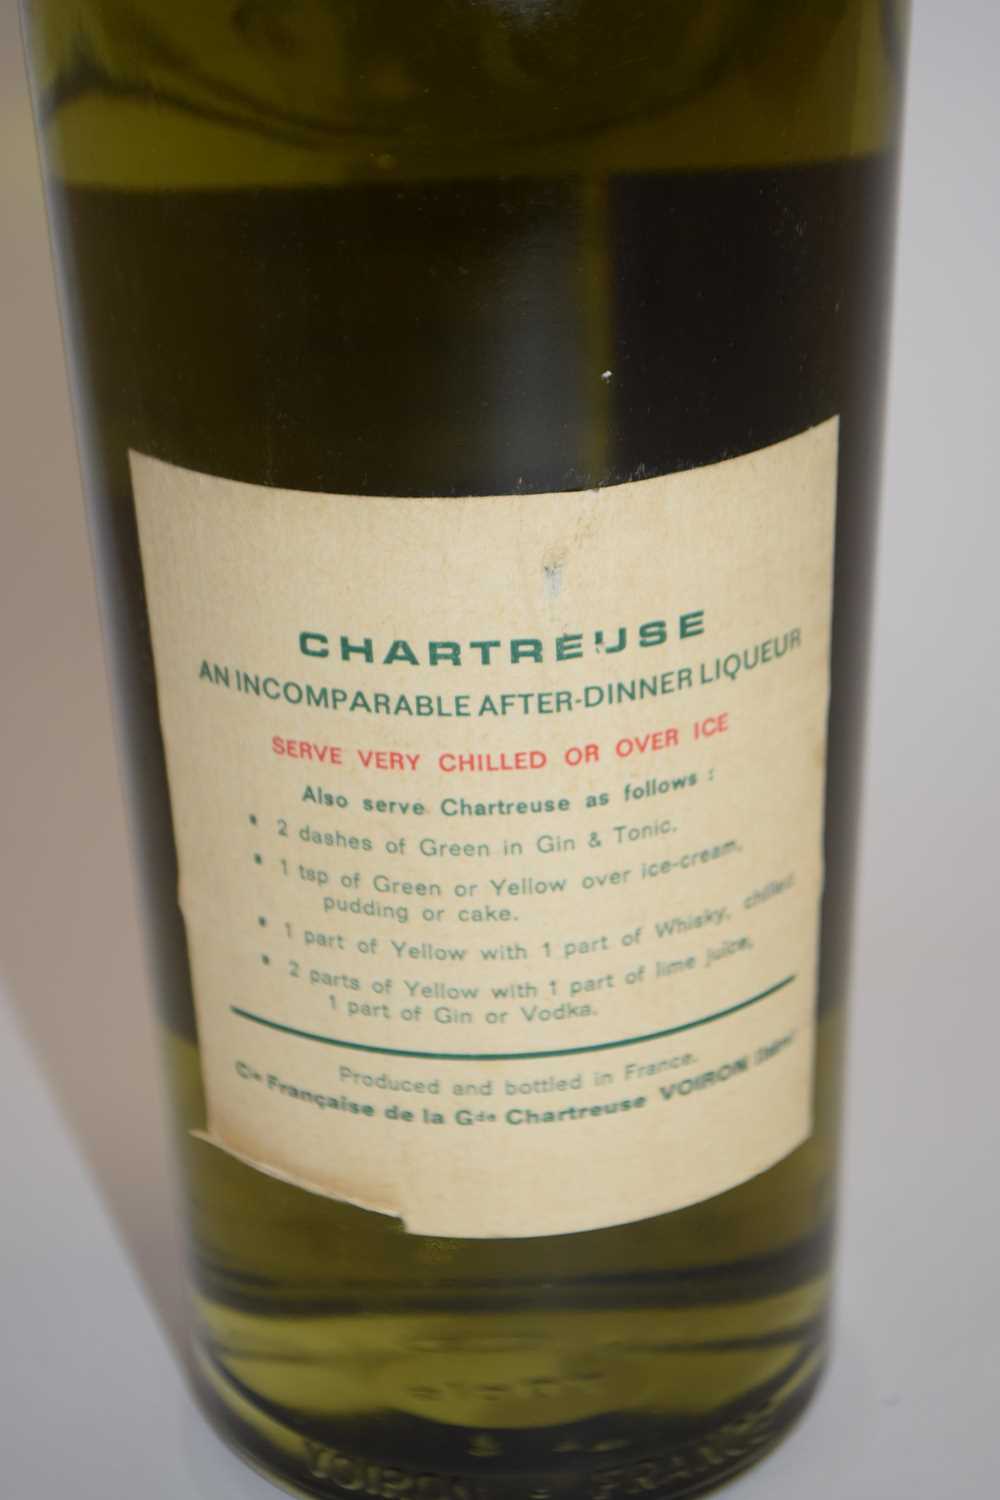 1 BOTTLE OF GREEN CHARTREUSE, 24 FL OZ, 96% PROOF - Image 2 of 2